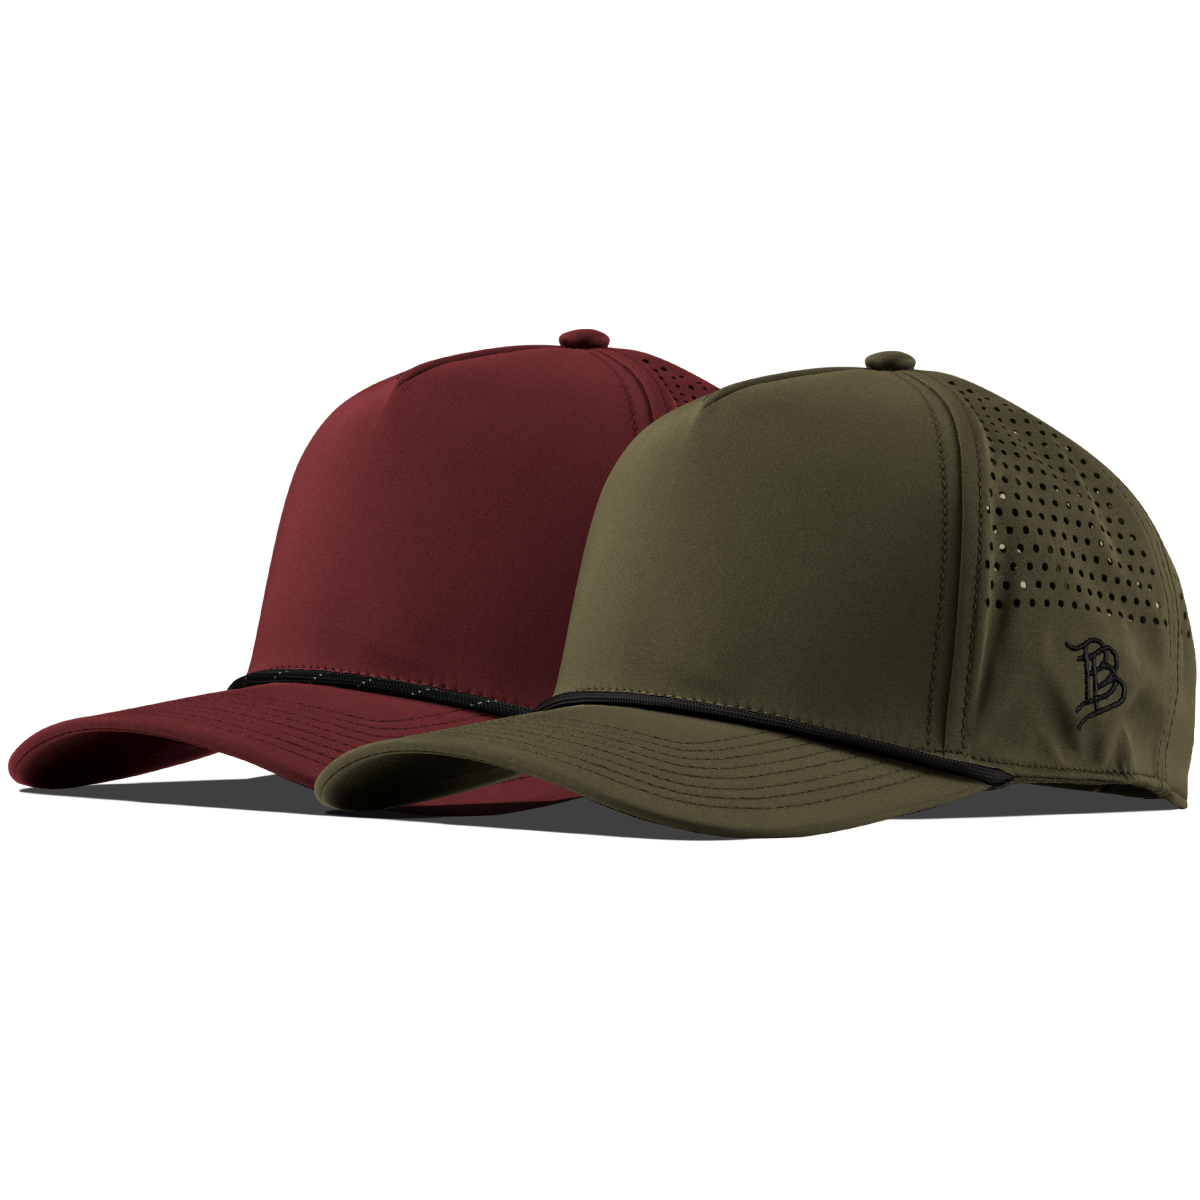 Bare Curved 5 Panel Performance 2-Pack Maroon/Black + Loden/Black